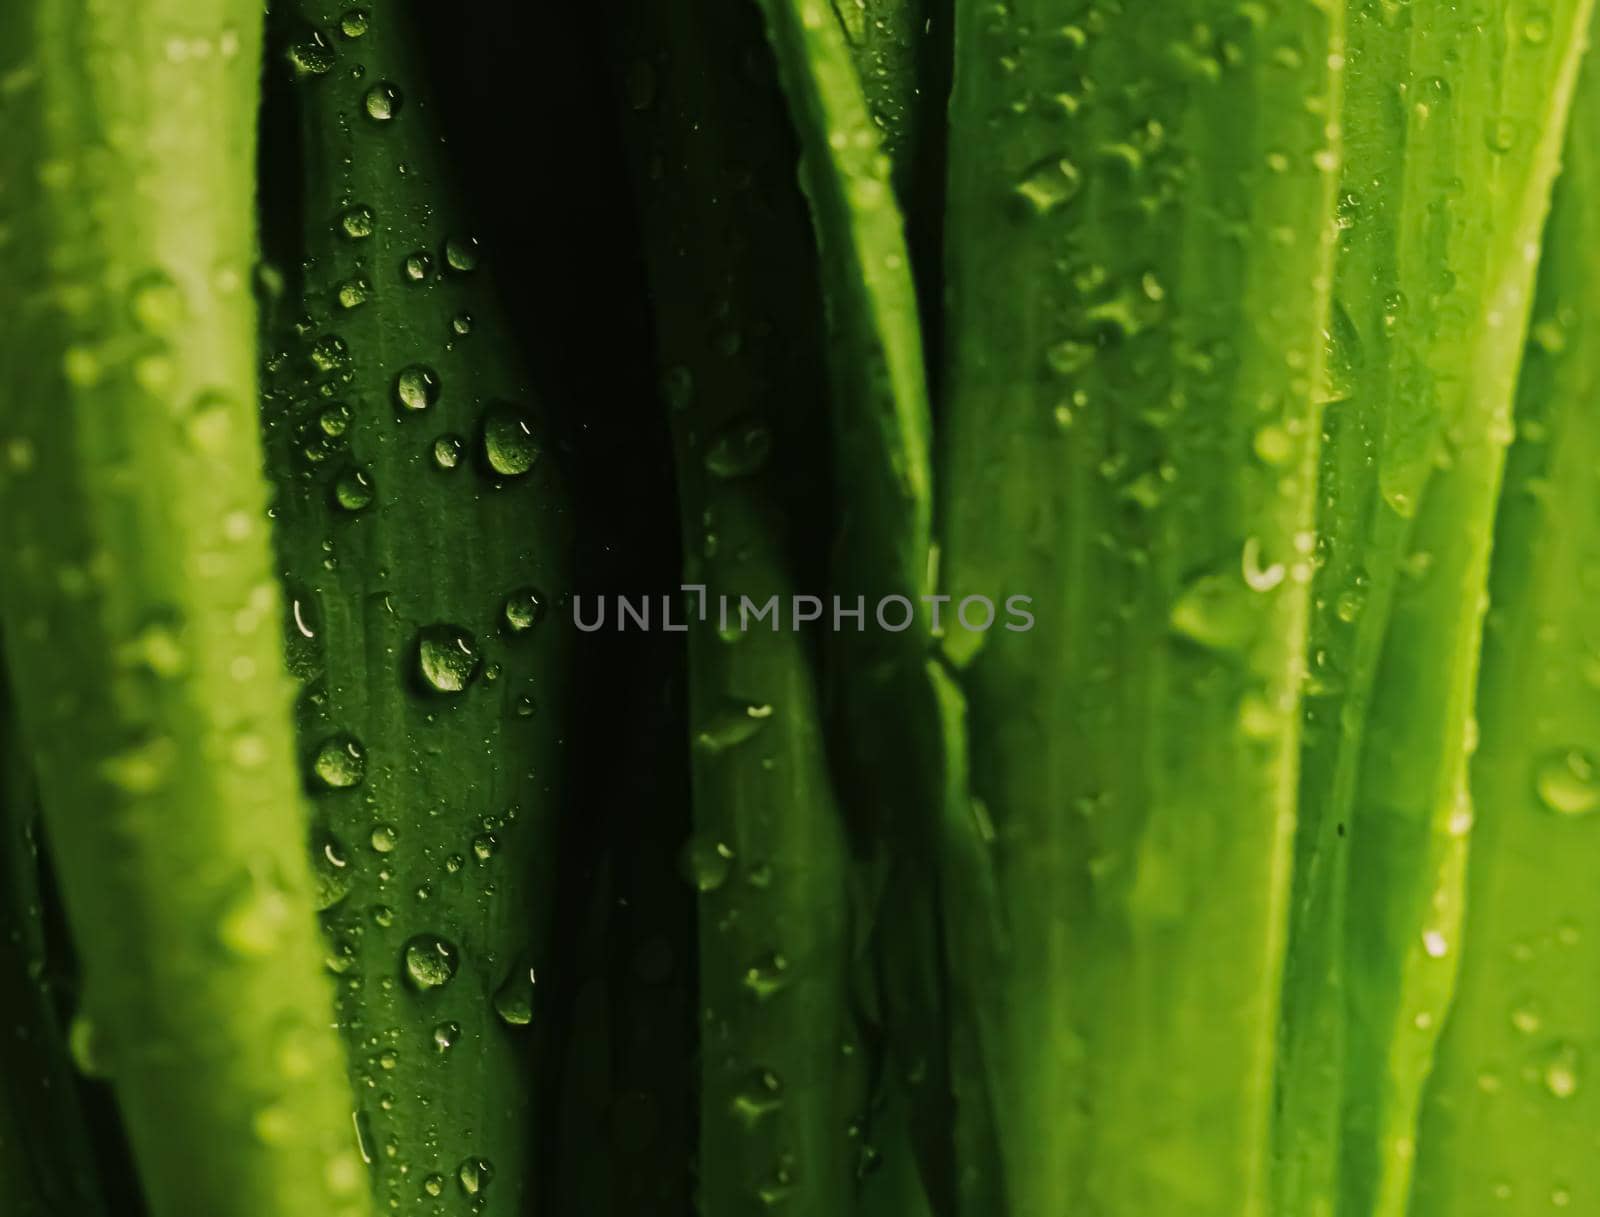 Green leaves with water drops as environmental background, nature closeup